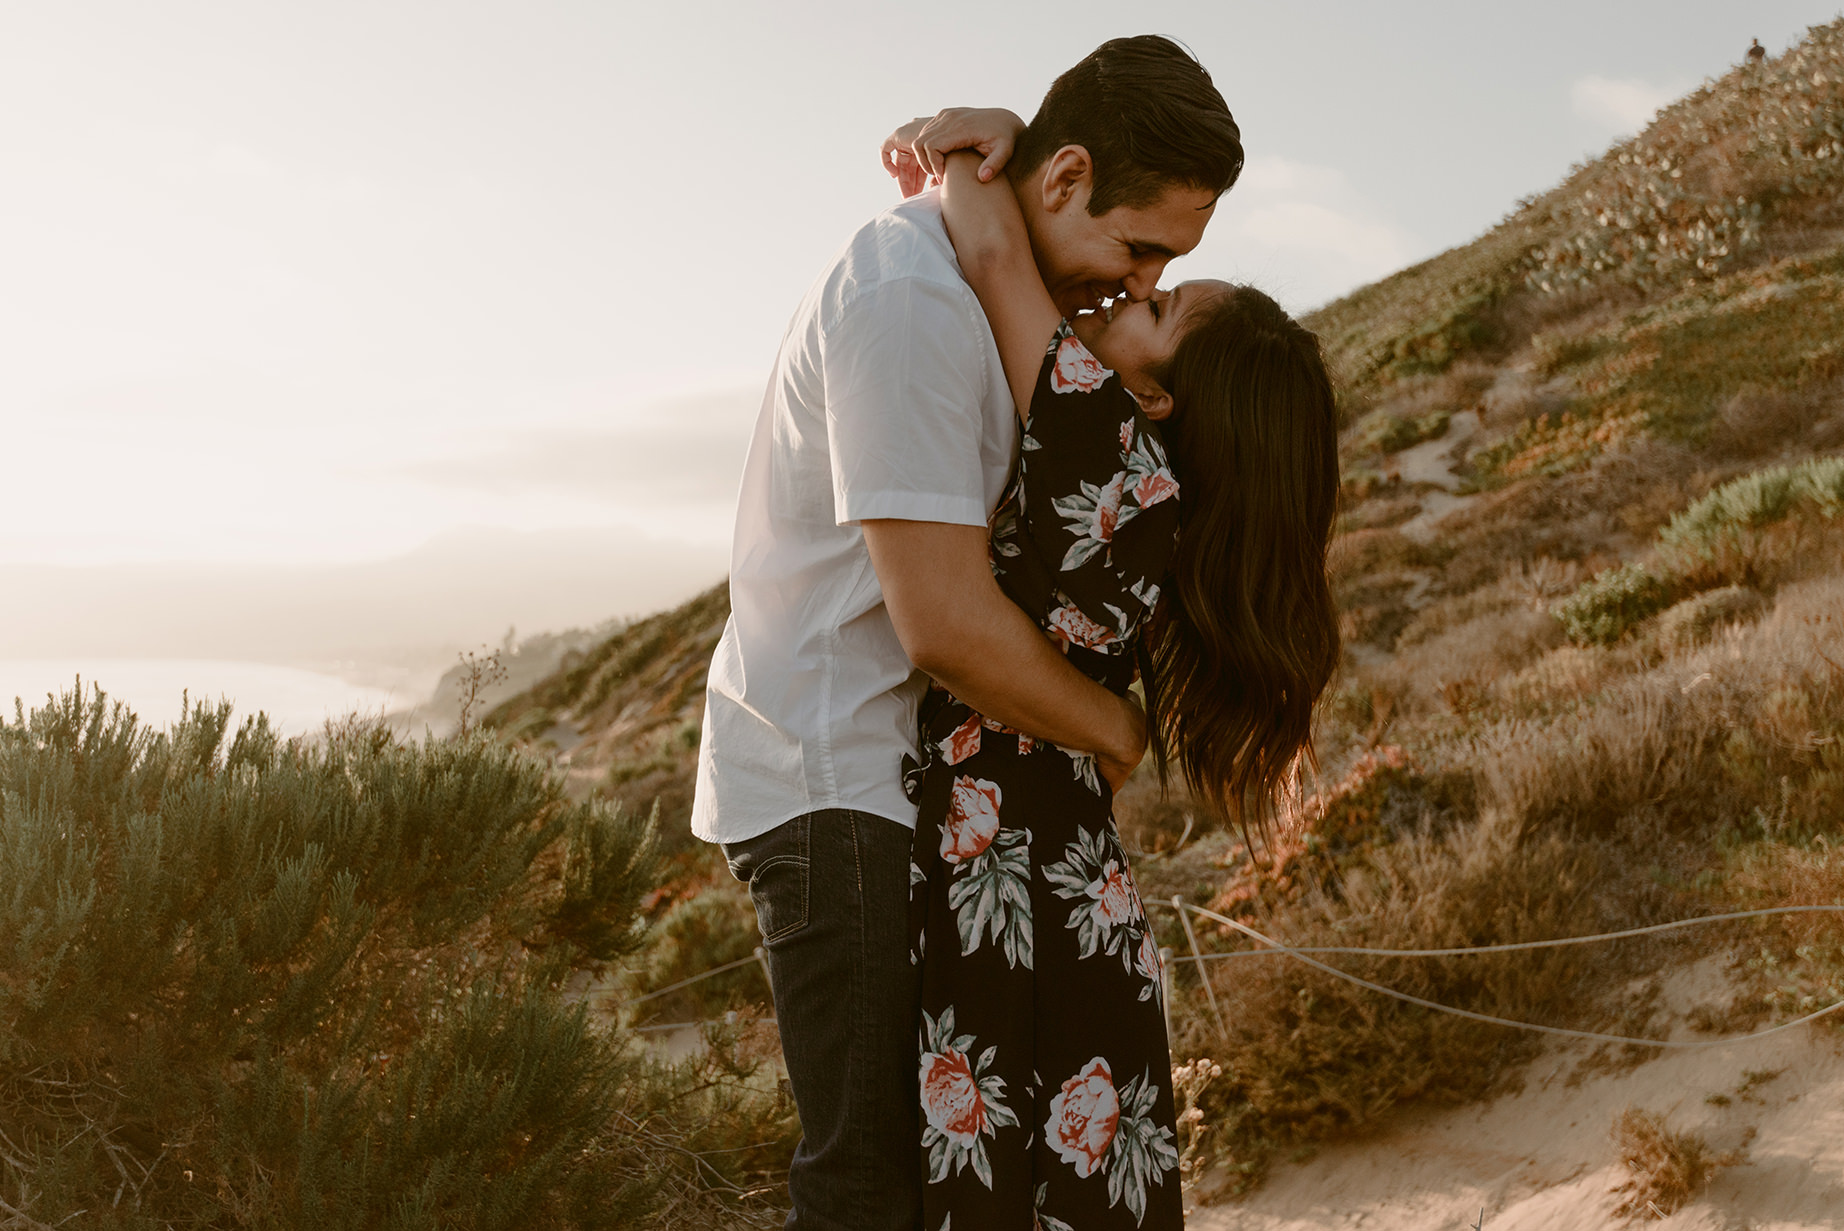 S+E // A Los Angeles Engagement Session – Julie Pepin Photography Blog